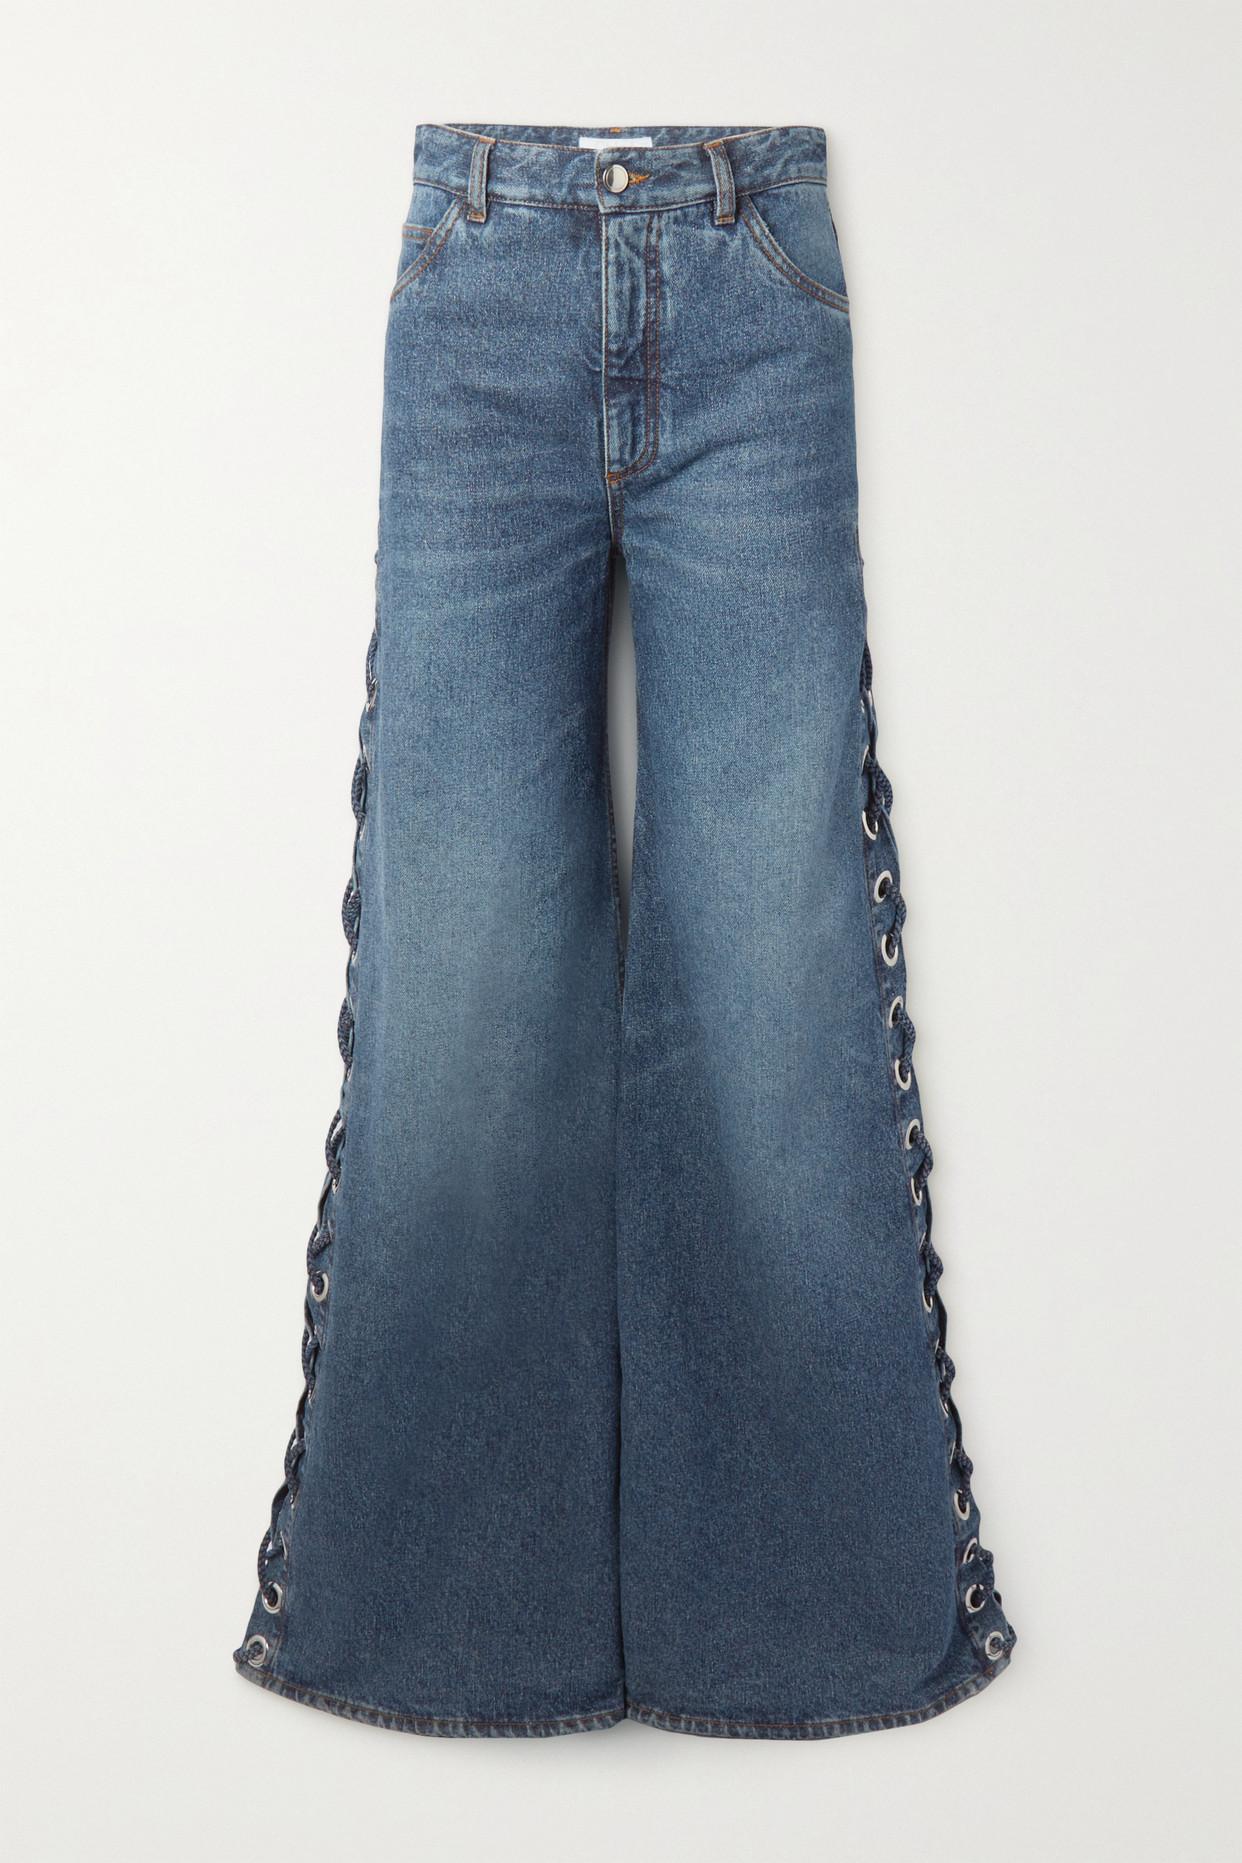 Chloé + Net Sustain Rave Eyelet-embellished High-rise Wide-leg Jeans in  Blue | Lyst